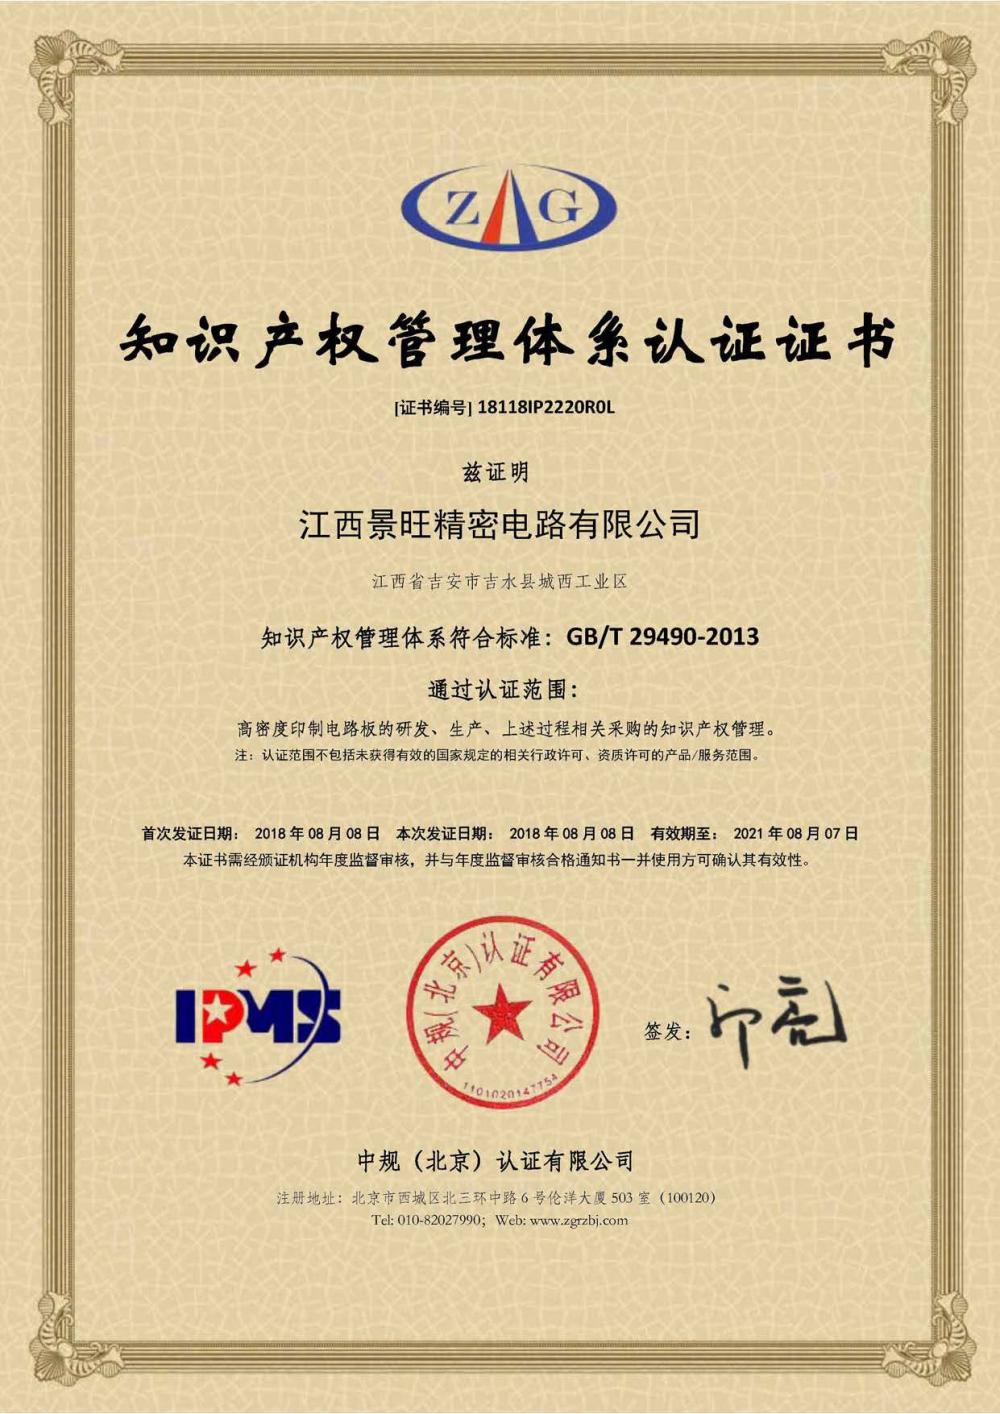 Certification certificate of intellectual property management system 